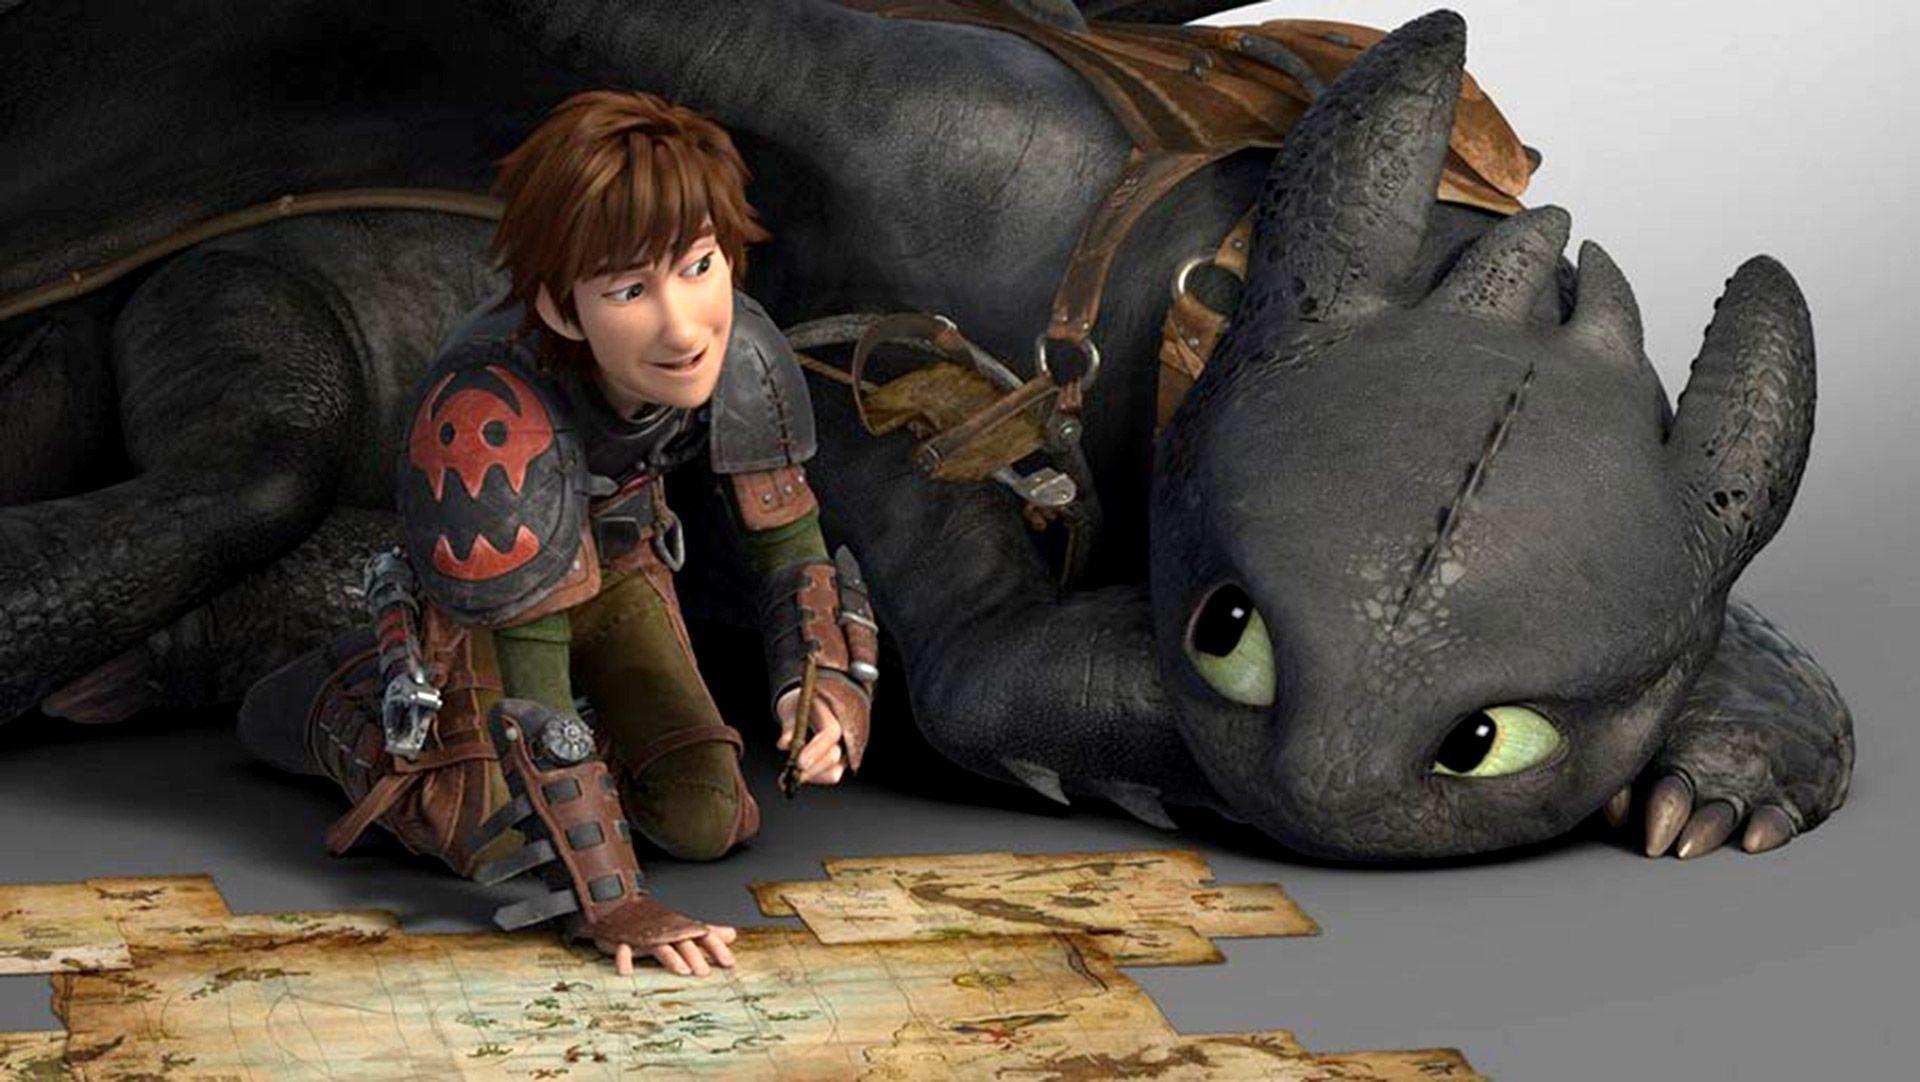 HOW TO TRAIN YOUR DRAGON 2 Wallpaper HD Background